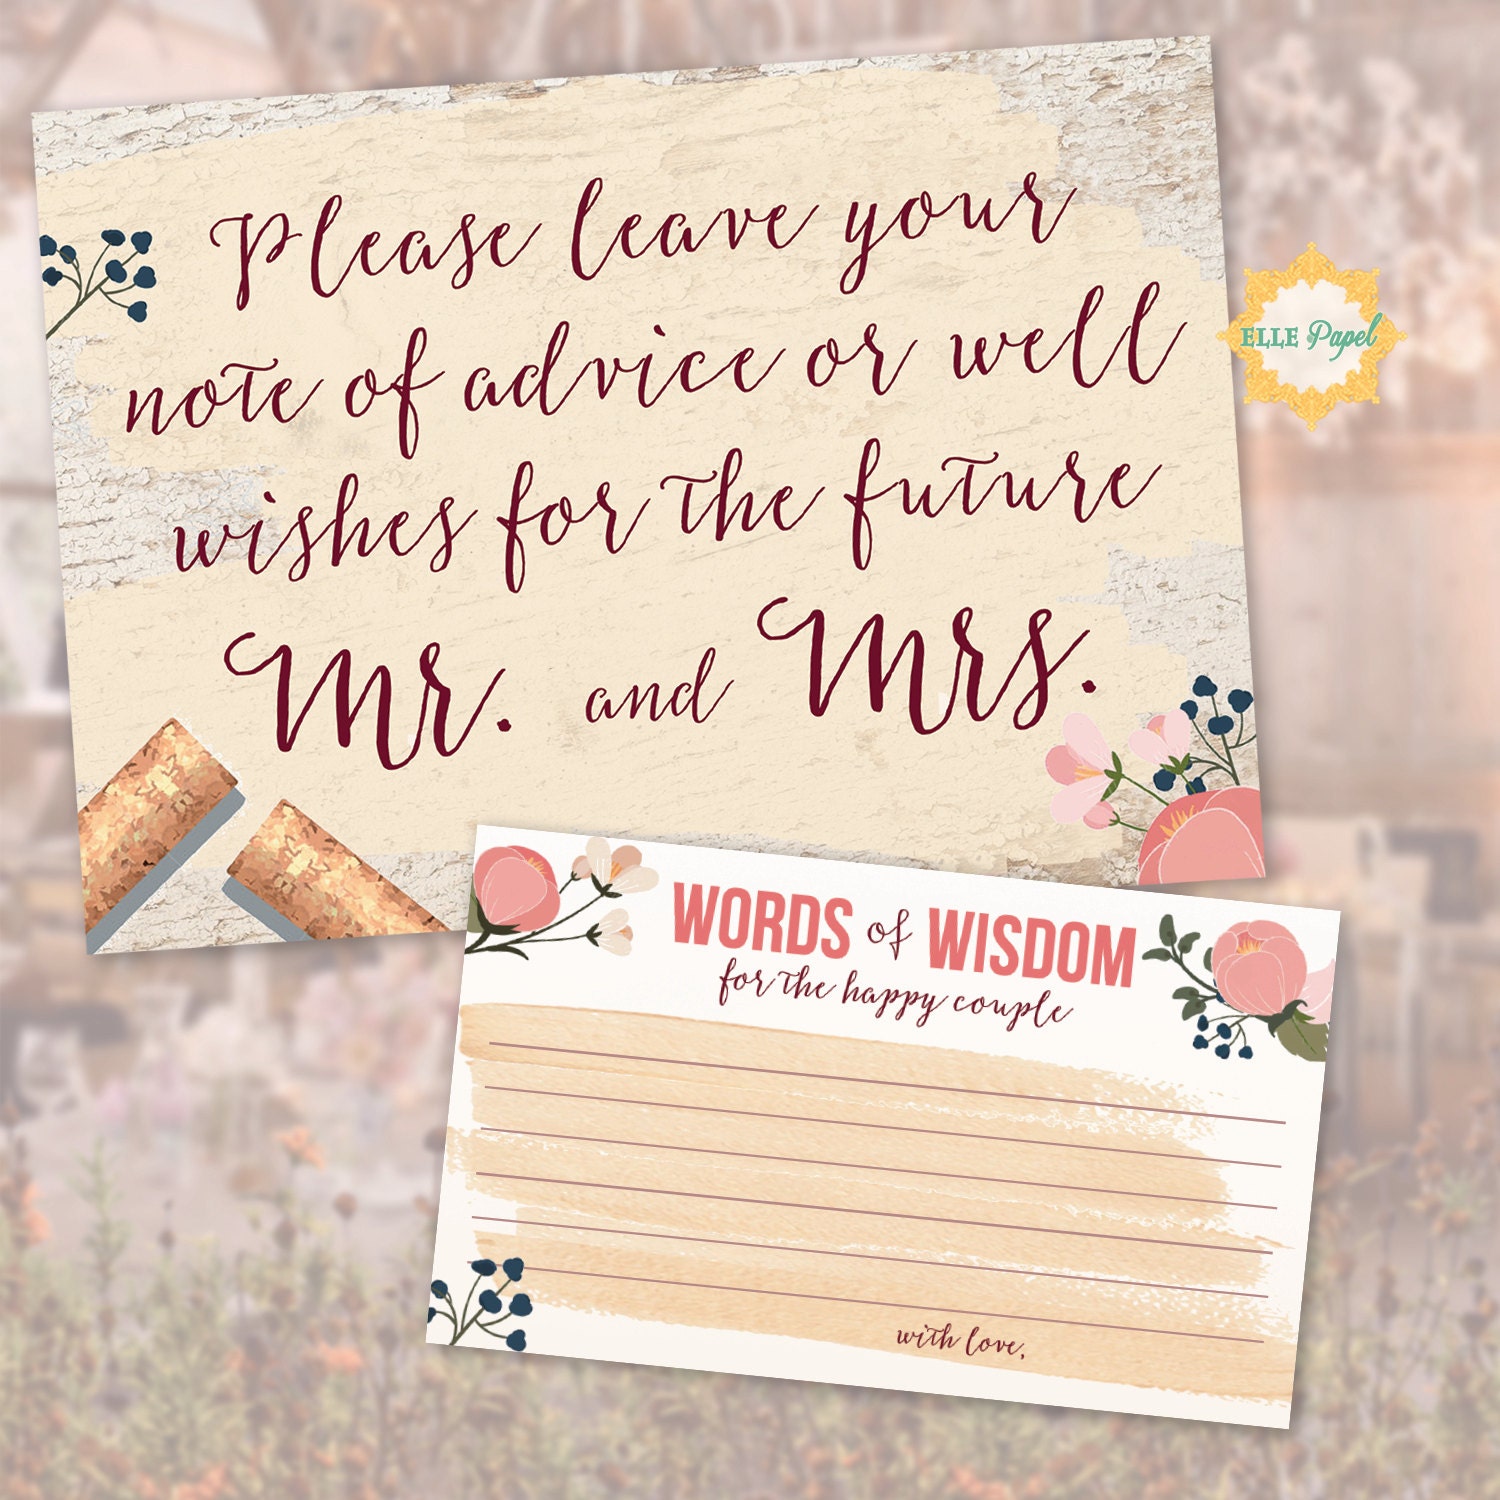 Leave Well Wishes Sign and Words of Wisdom Cards Wine Rustic Vineyard Theme for a Bridal Shower